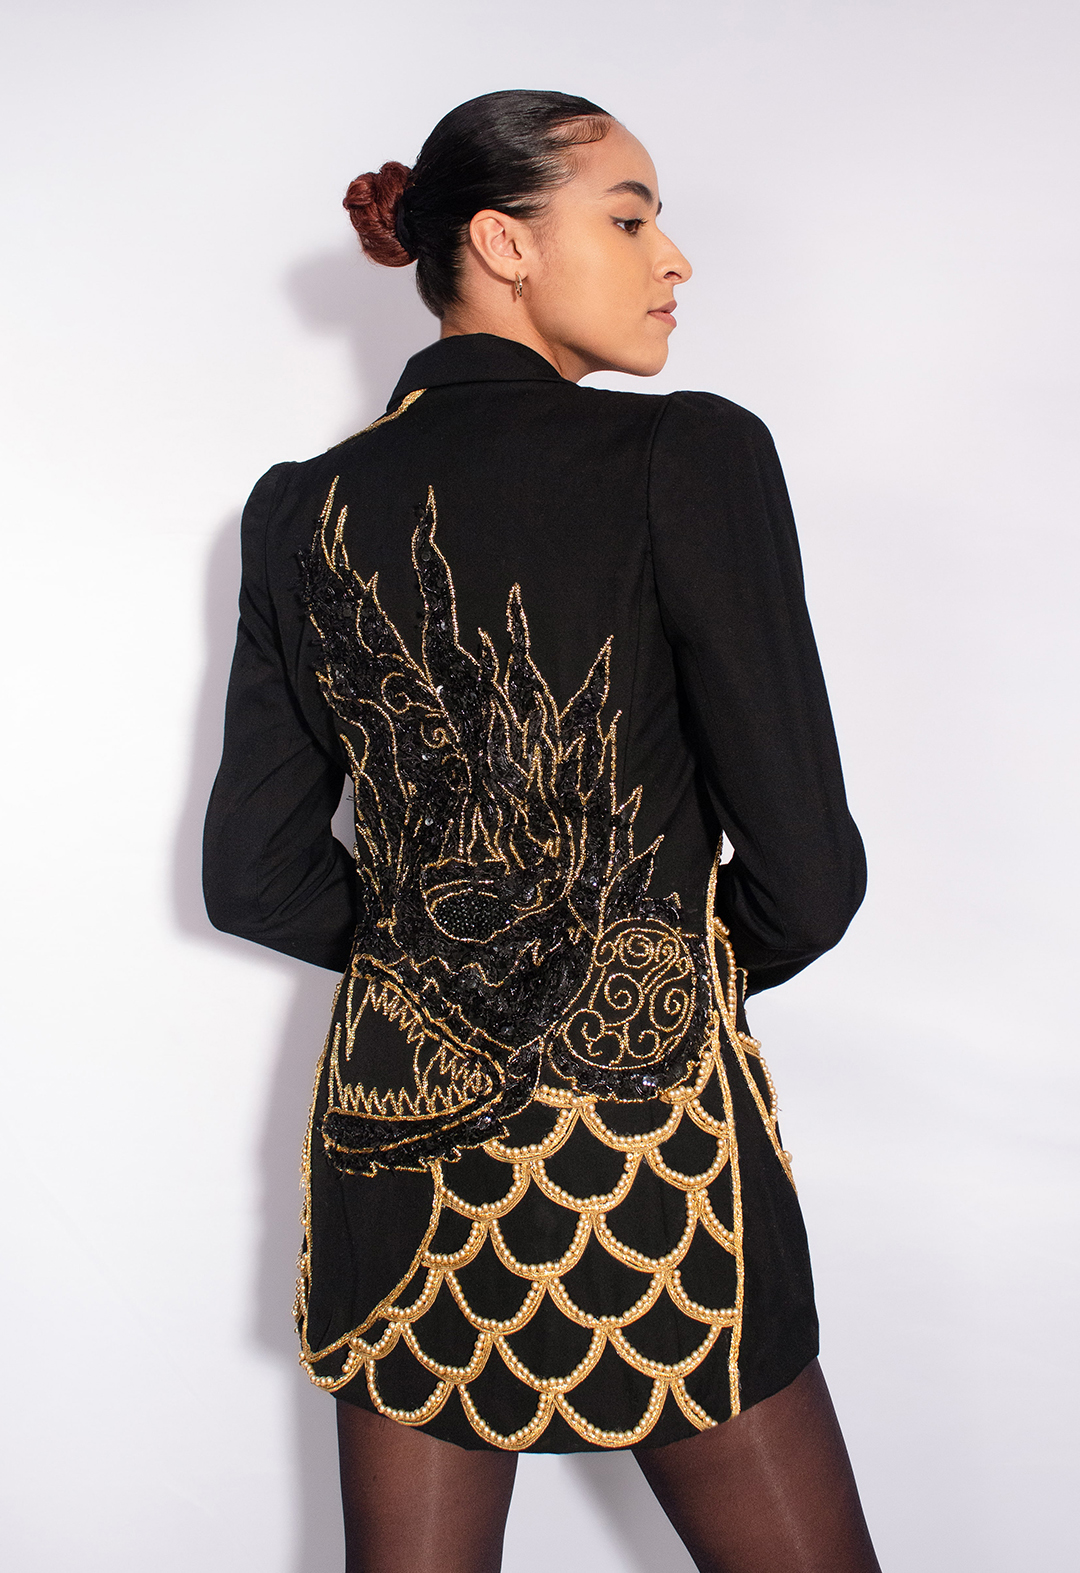 The back view of the jacket shows the head of the Naga that is fully beaded with gold seed beads. The inside of it is filled with black sequin trim. The head is connected to the neck, which is filled with scales made out of gold metallic trims and glass pearls.